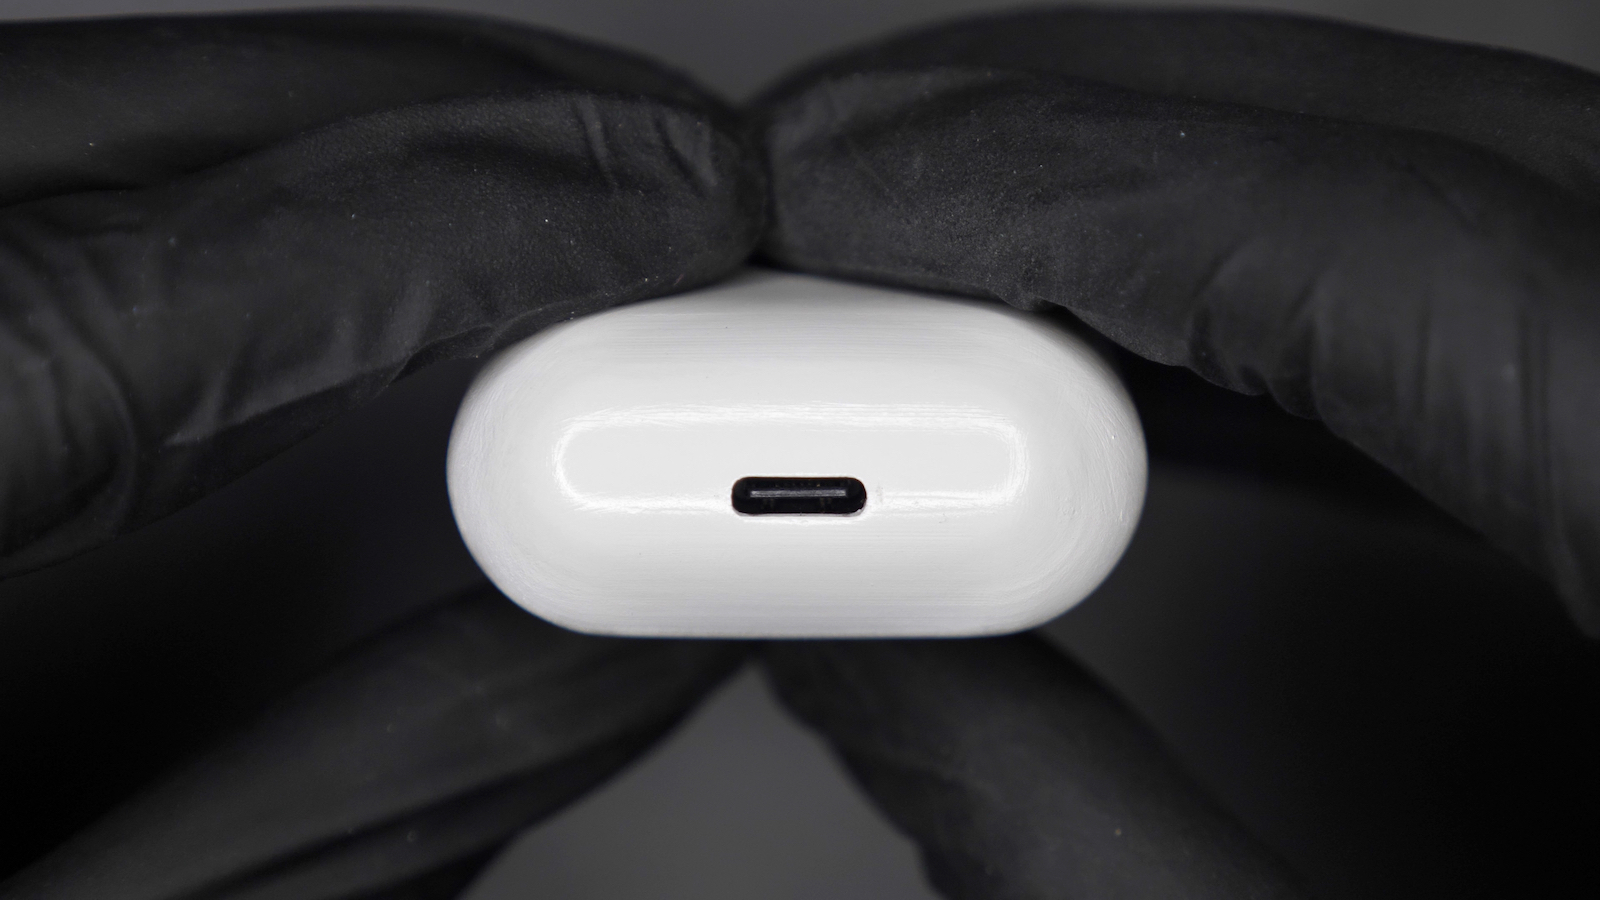 AirPods Repairability Project Adds USB-C Port and 3D-Printed Casing